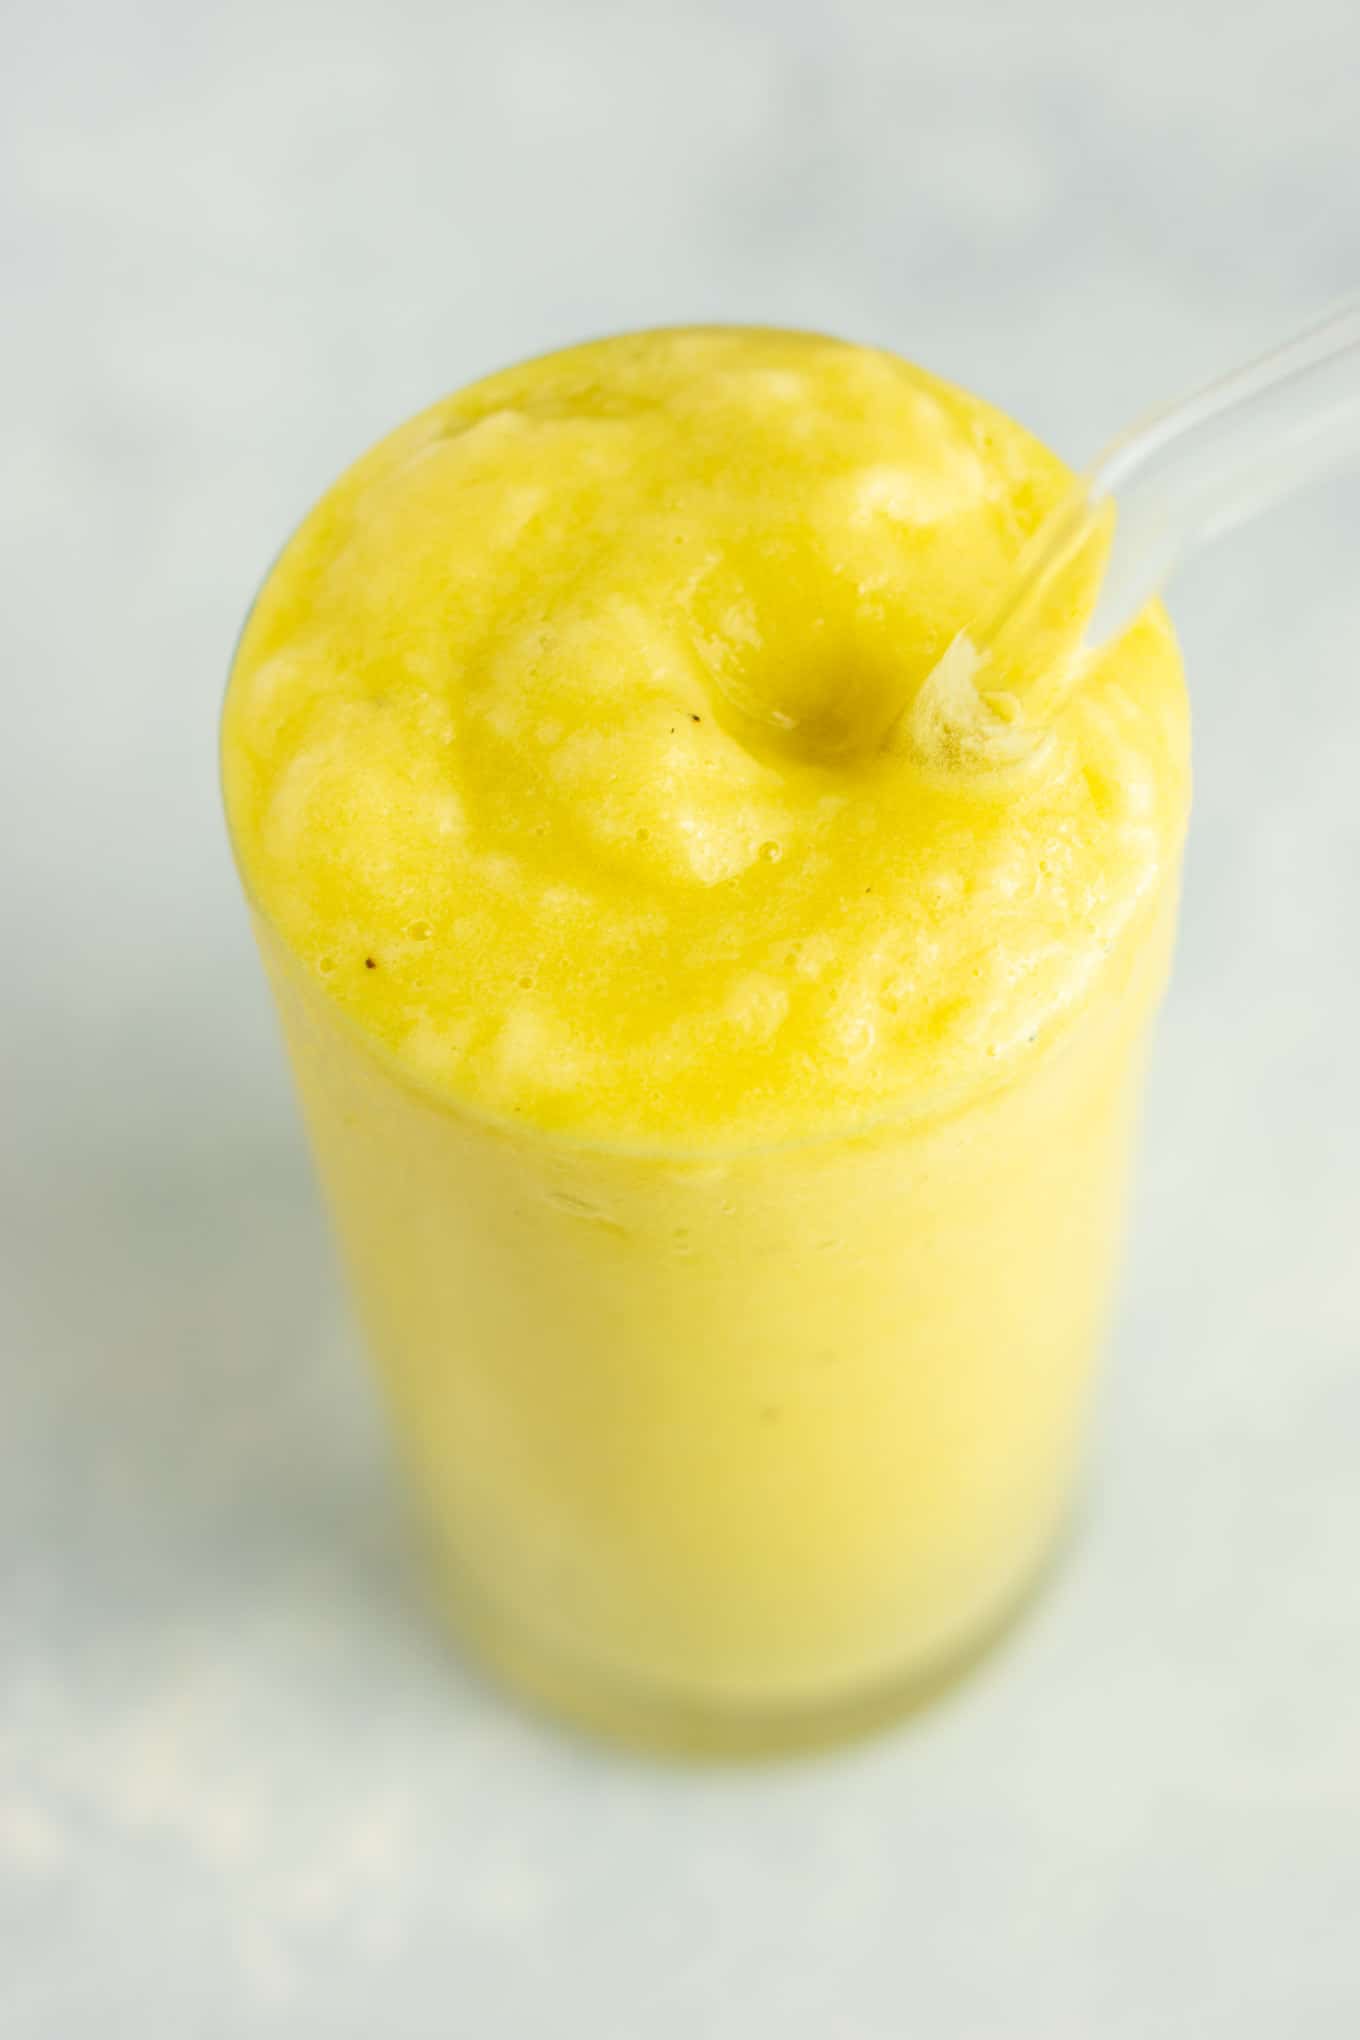 Pineapple detox smoothie with cucumbers, celery, lemon, peaches, ginger, and frozen bananas. A healthy smoothie recipe that tastes delicious! #detox #detoxsmoothie #healthysmoothie #vegan #healthyeating #healthyrecipe #smoothie #vegansmoothie